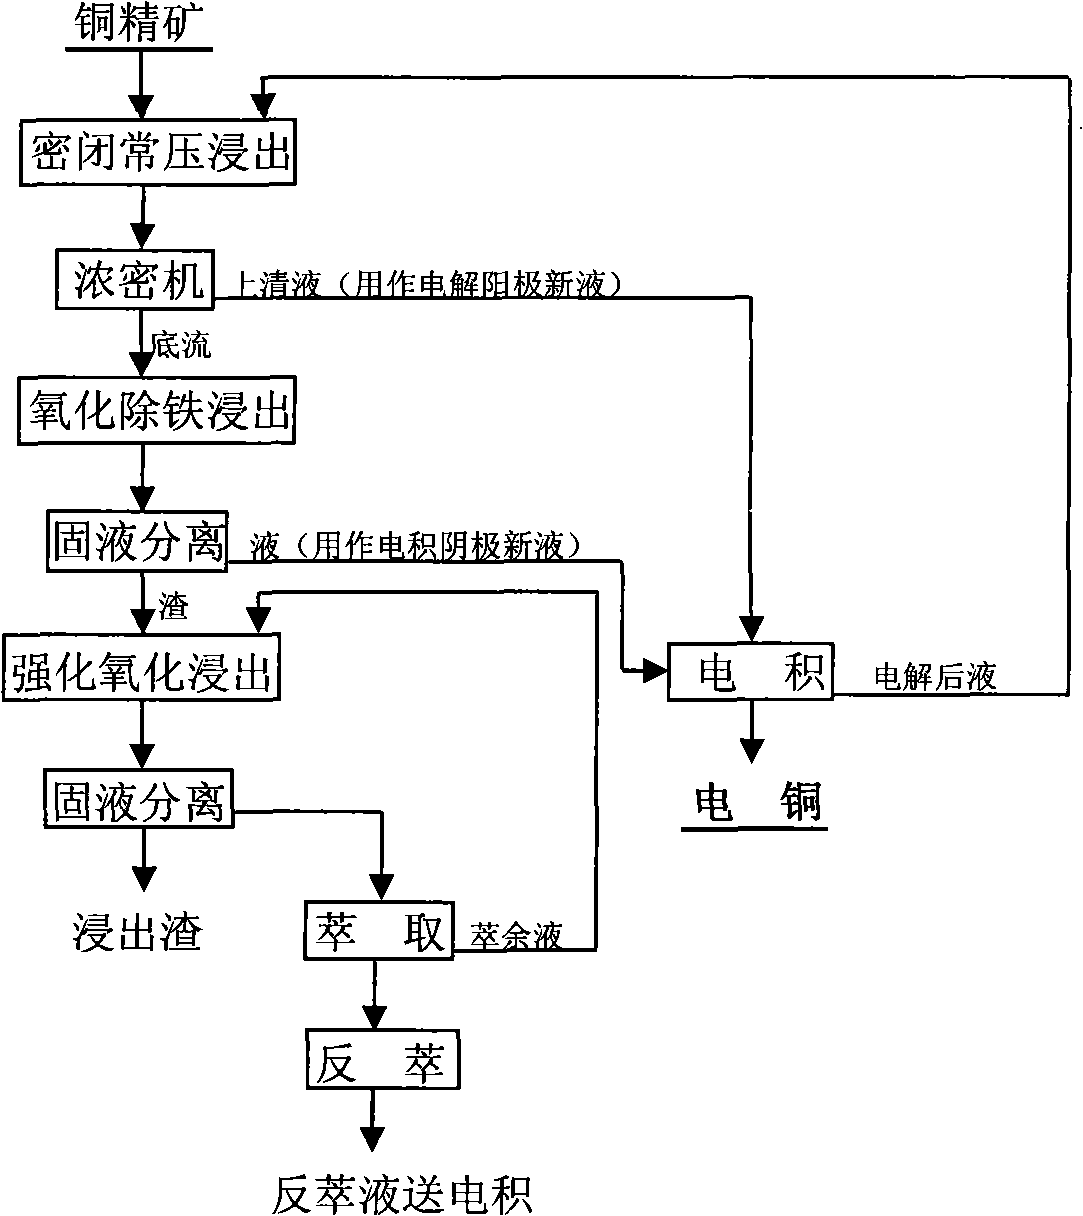 Process for extracting copper by wet method from copper-containing sulfidization ore